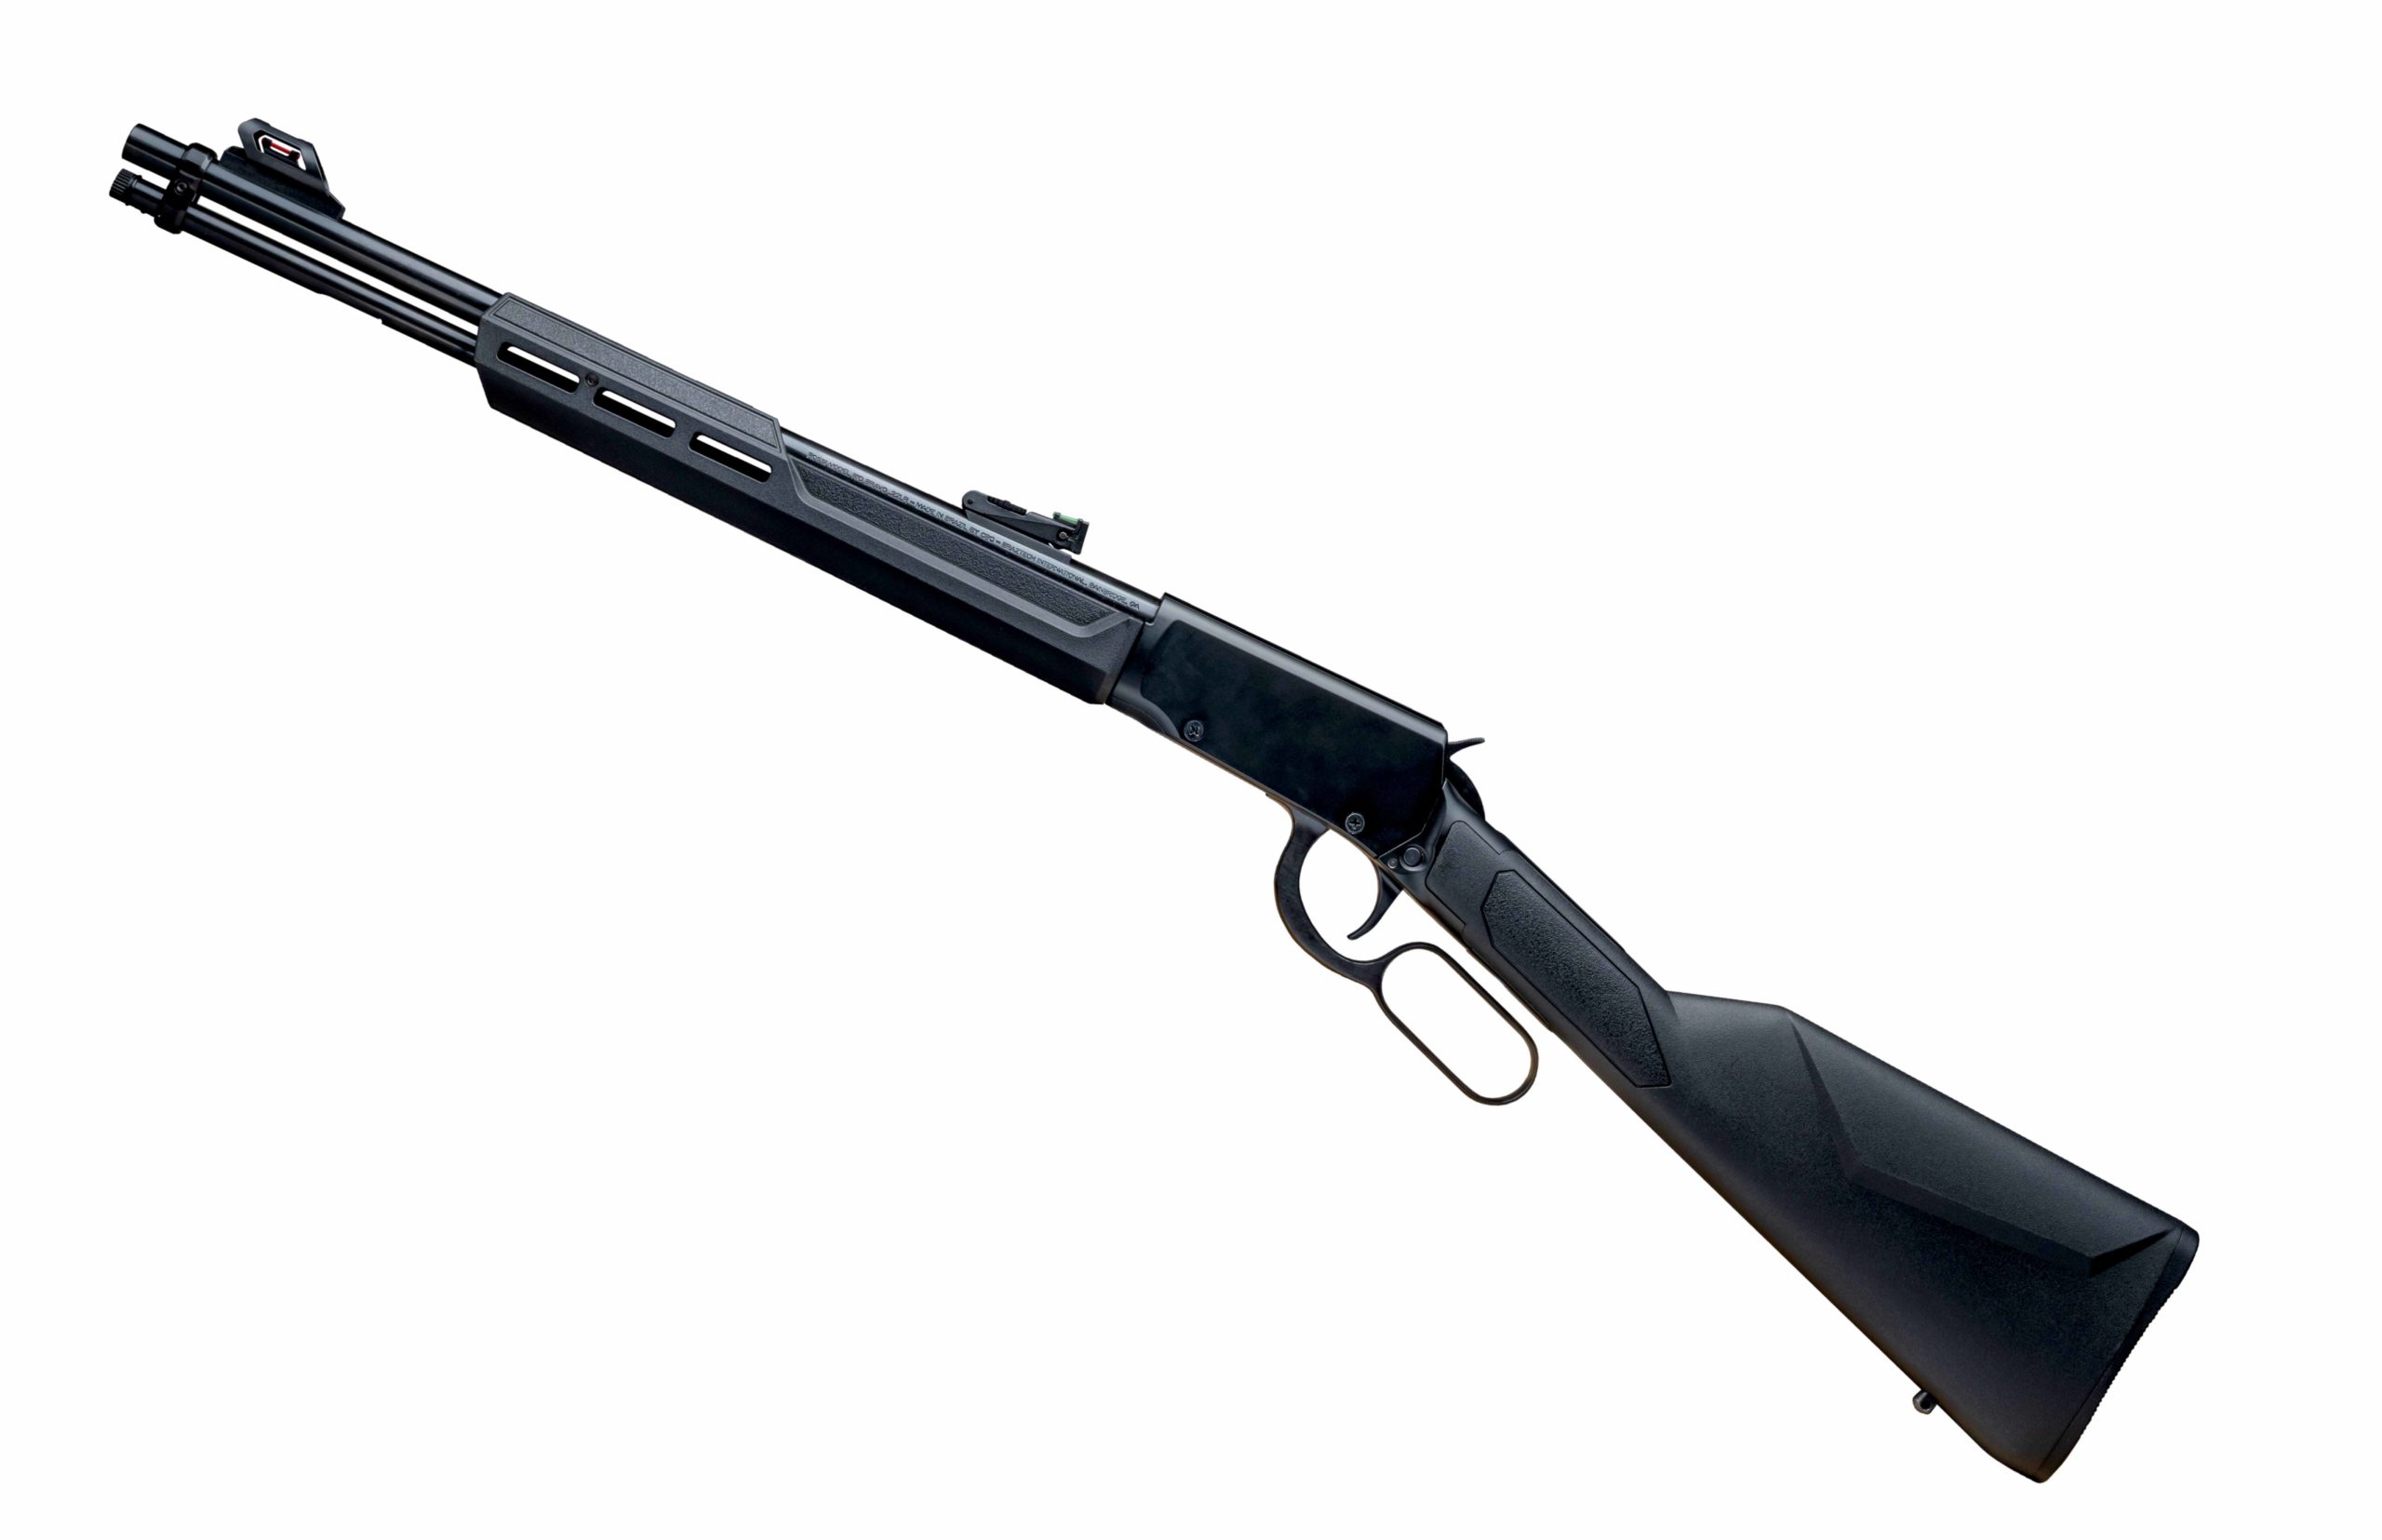 Overall, the Rossi lever-action .22 proves a tidy package.